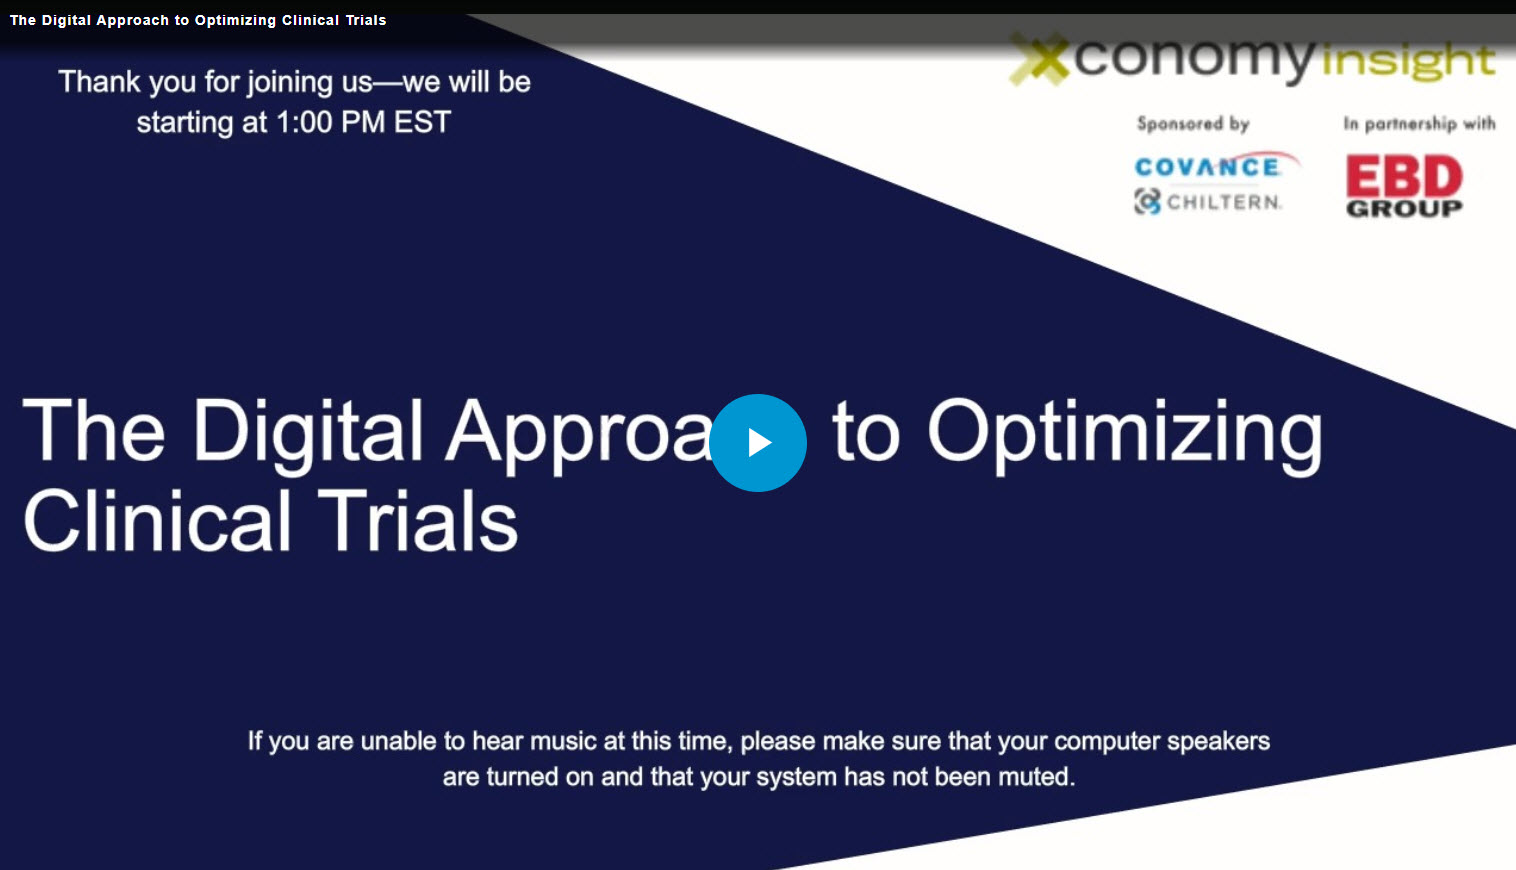 The Digital Approach to Optimizing Clinical Trials